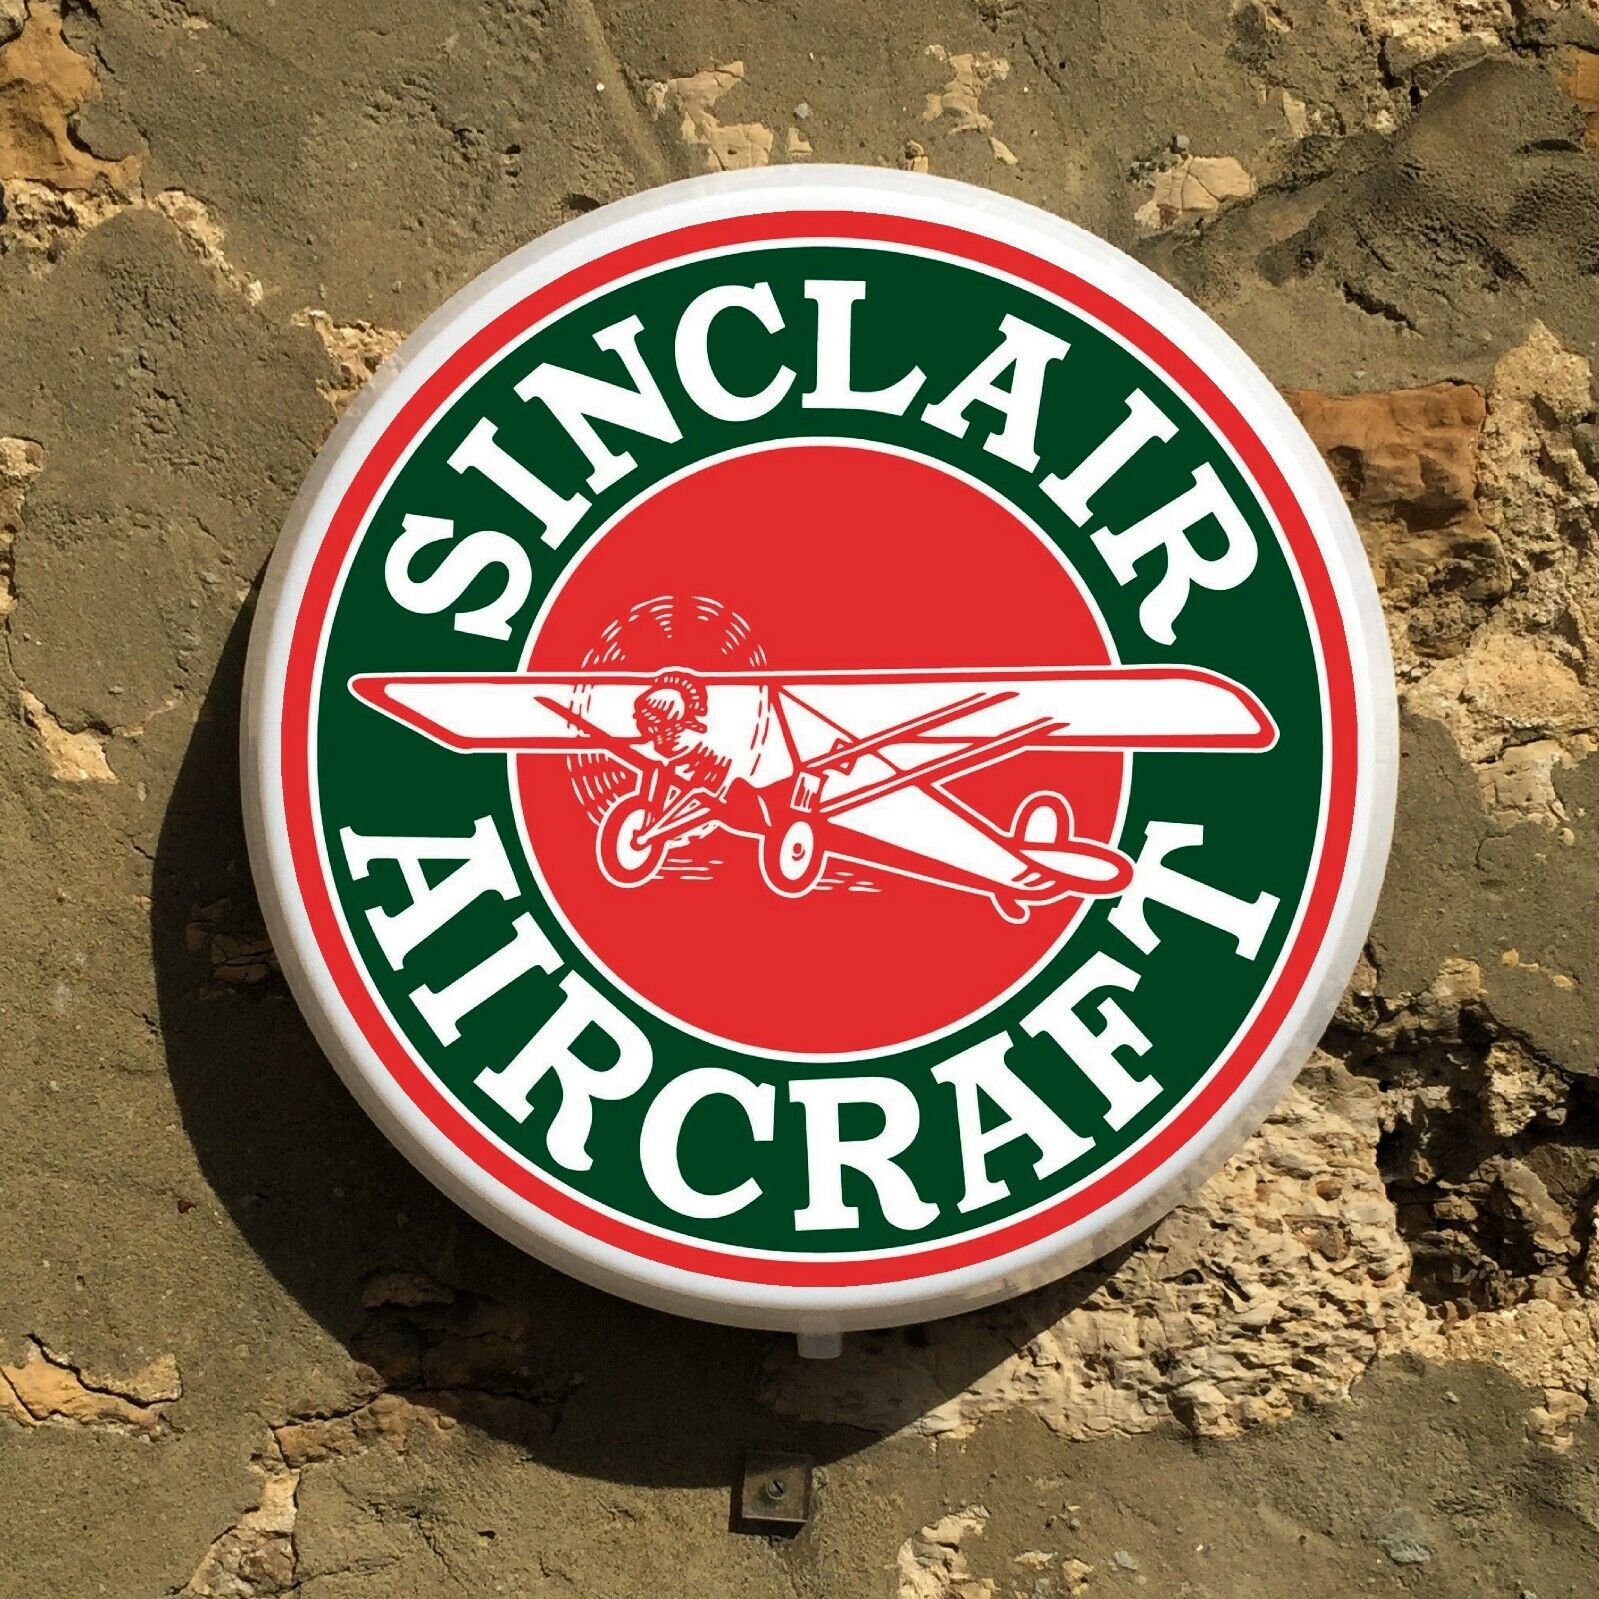 SINCLAIR AIRCRAFT OIL LED SIGN WALL MOUNTED LIGHT BOX GARAGE VINTAGE AVIATION